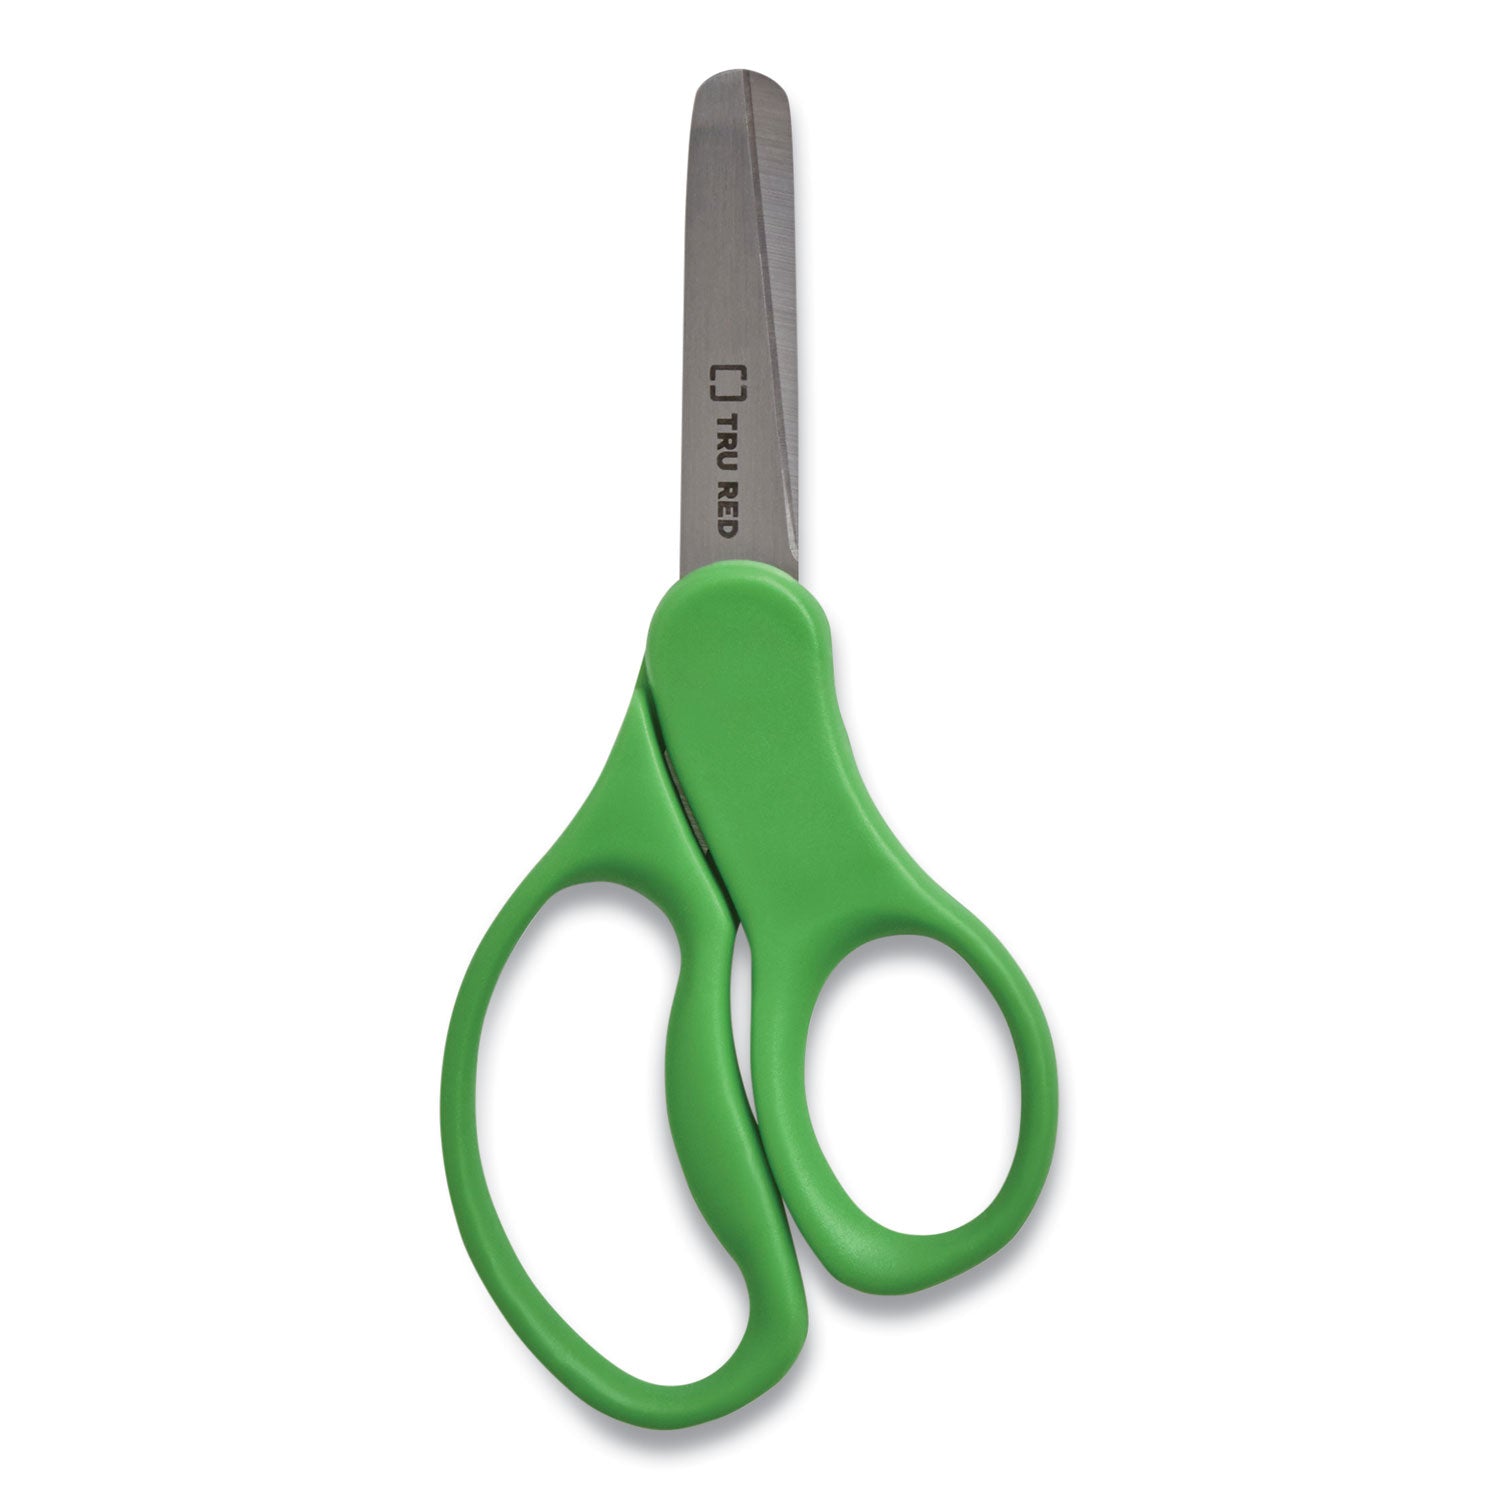 kids-blunt-tip-stainless-steel-safety-scissors-5-long-205-cut-length-green;-yellow-straight-handles-2-pack_tud24380501 - 2